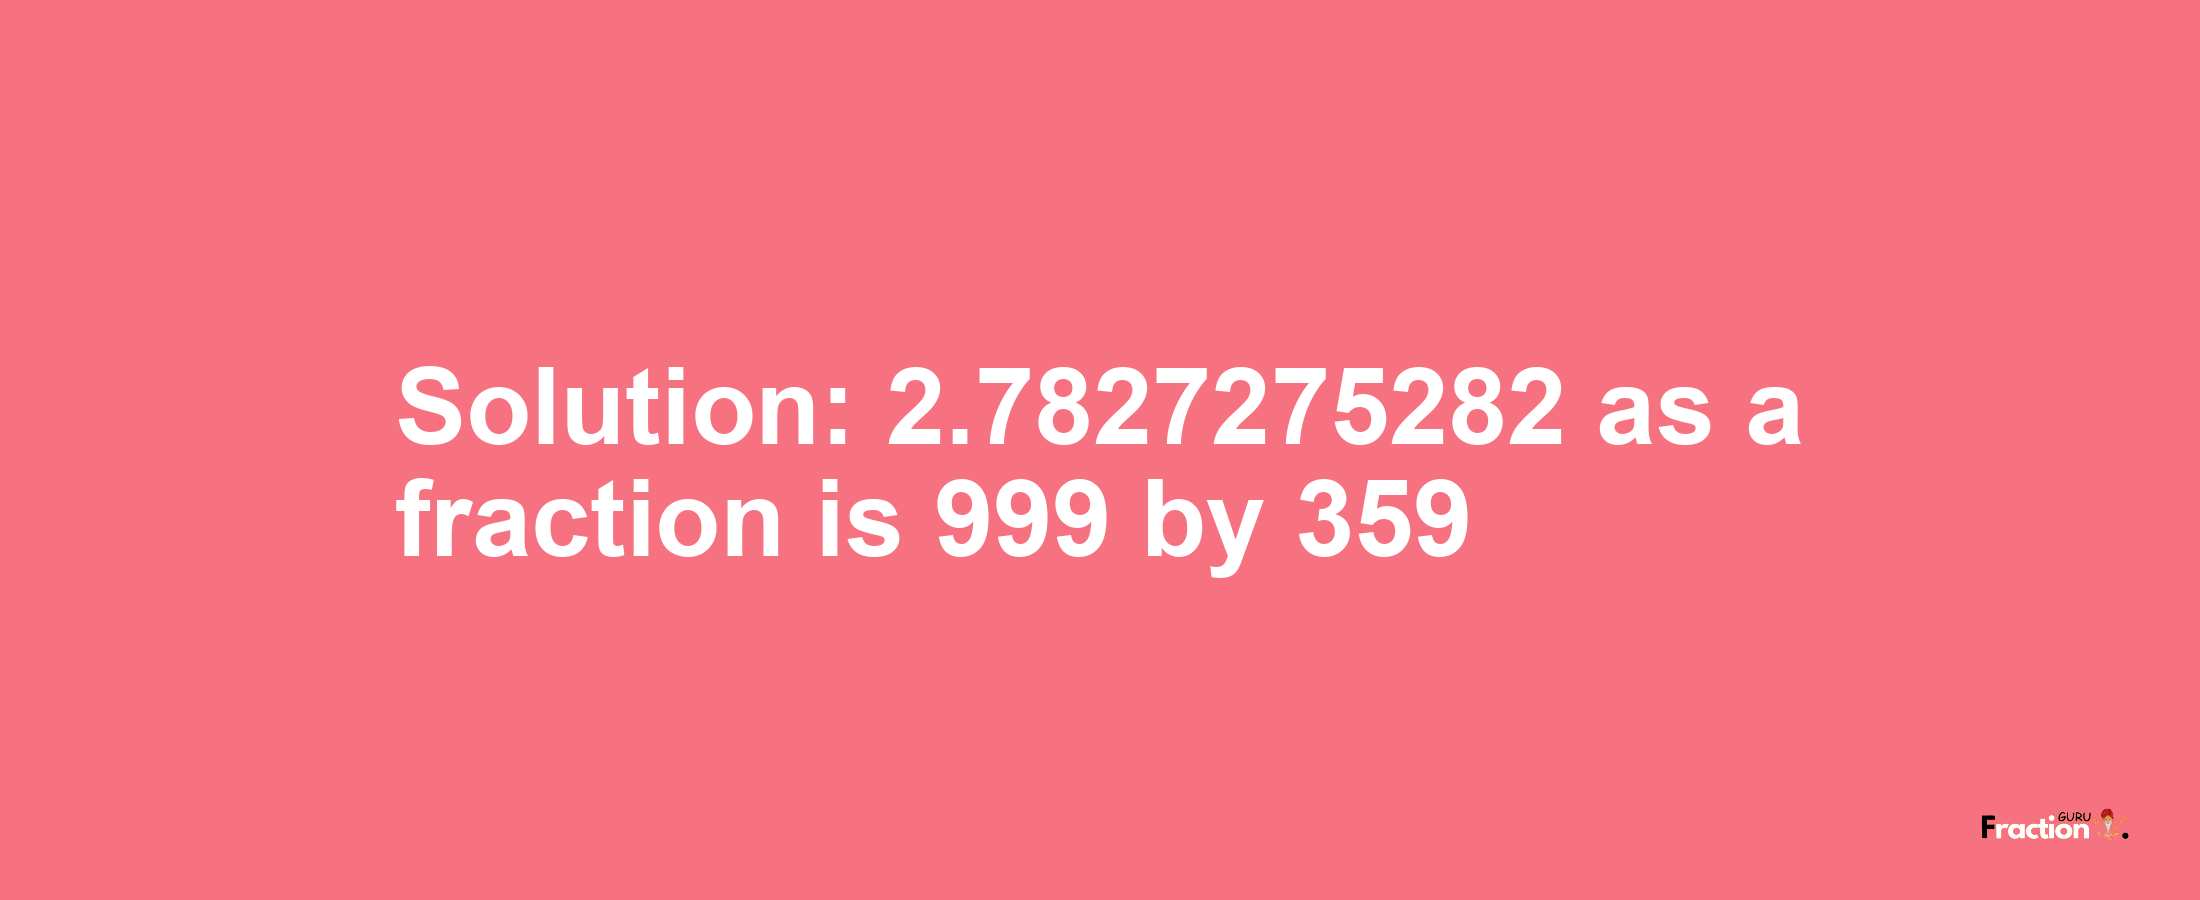 Solution:2.7827275282 as a fraction is 999/359